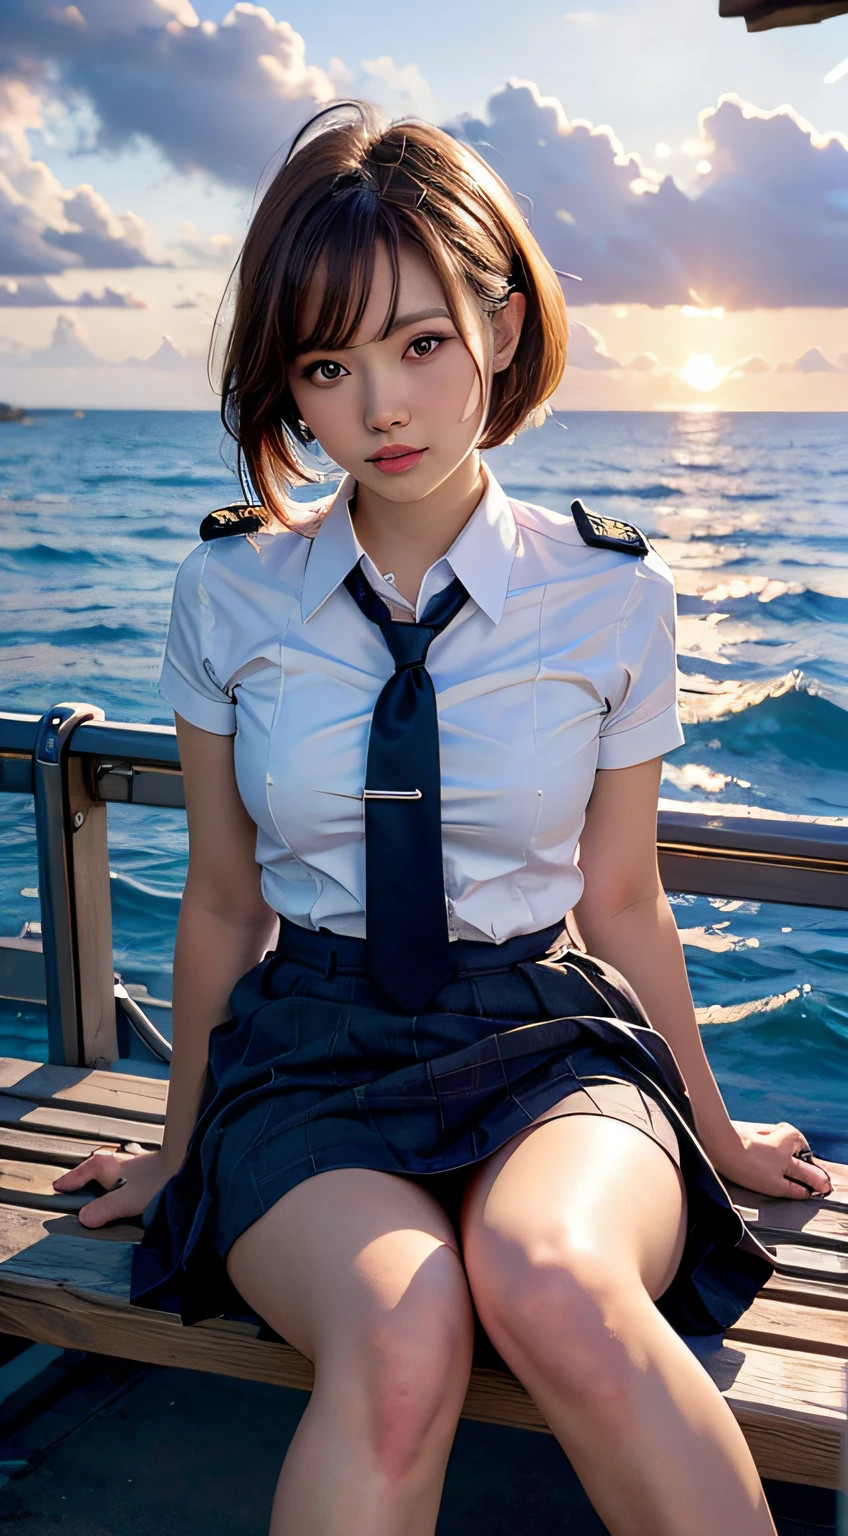 (Best Quality, High resolution, masutepiece :1.3), Pretty women,
Against the background of orangey sunset sky、Clouds and sun sink into the ocean, Beautiful  in uniform sitting. Her hair is light brown, And it's medium bob style. She wears a white blouse and pleated skirt as part of her uniform. She sits with her legs apart, And her gaze is directed to the camera. Create this scene from a low angle shot.